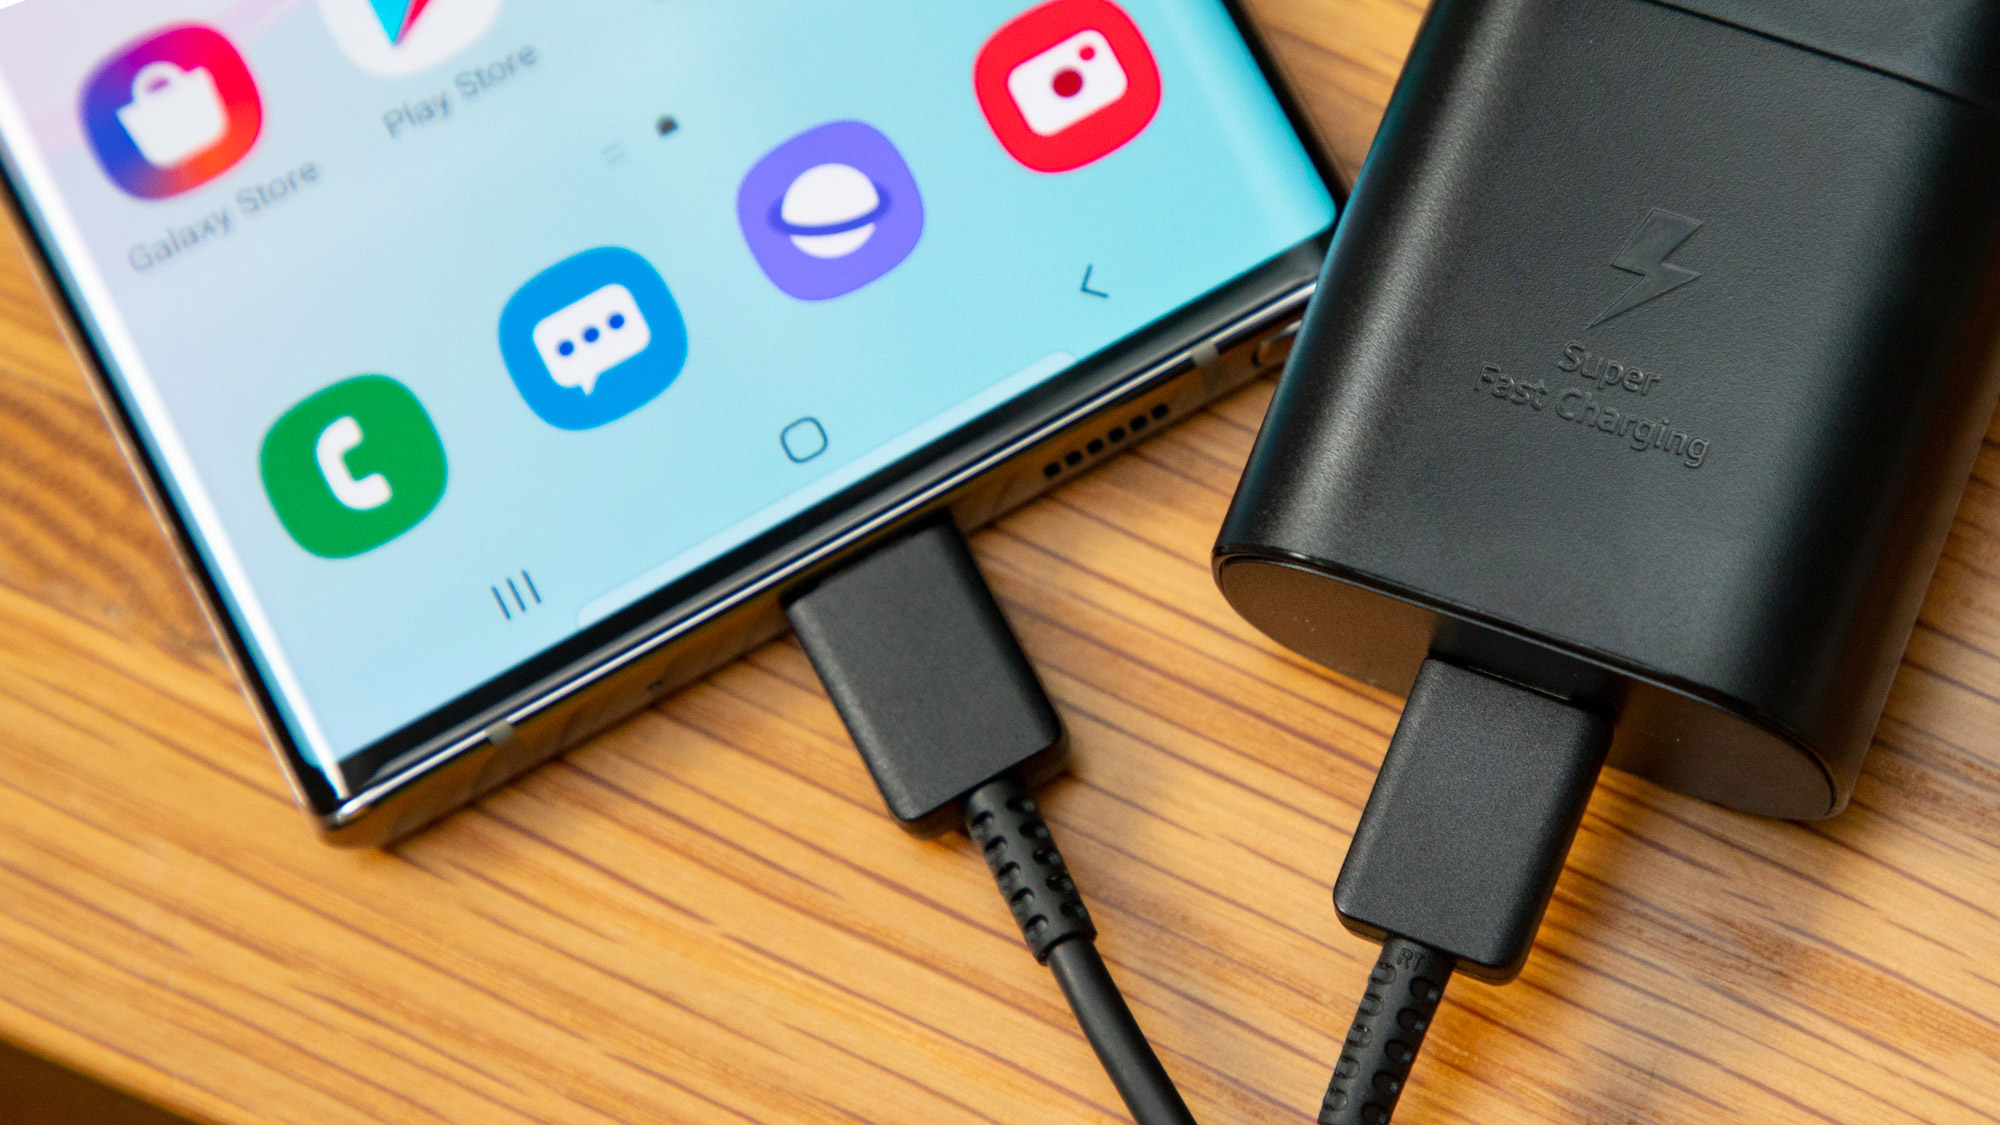 10 Best Galaxy Note 10 Accessories | Tom's Guide